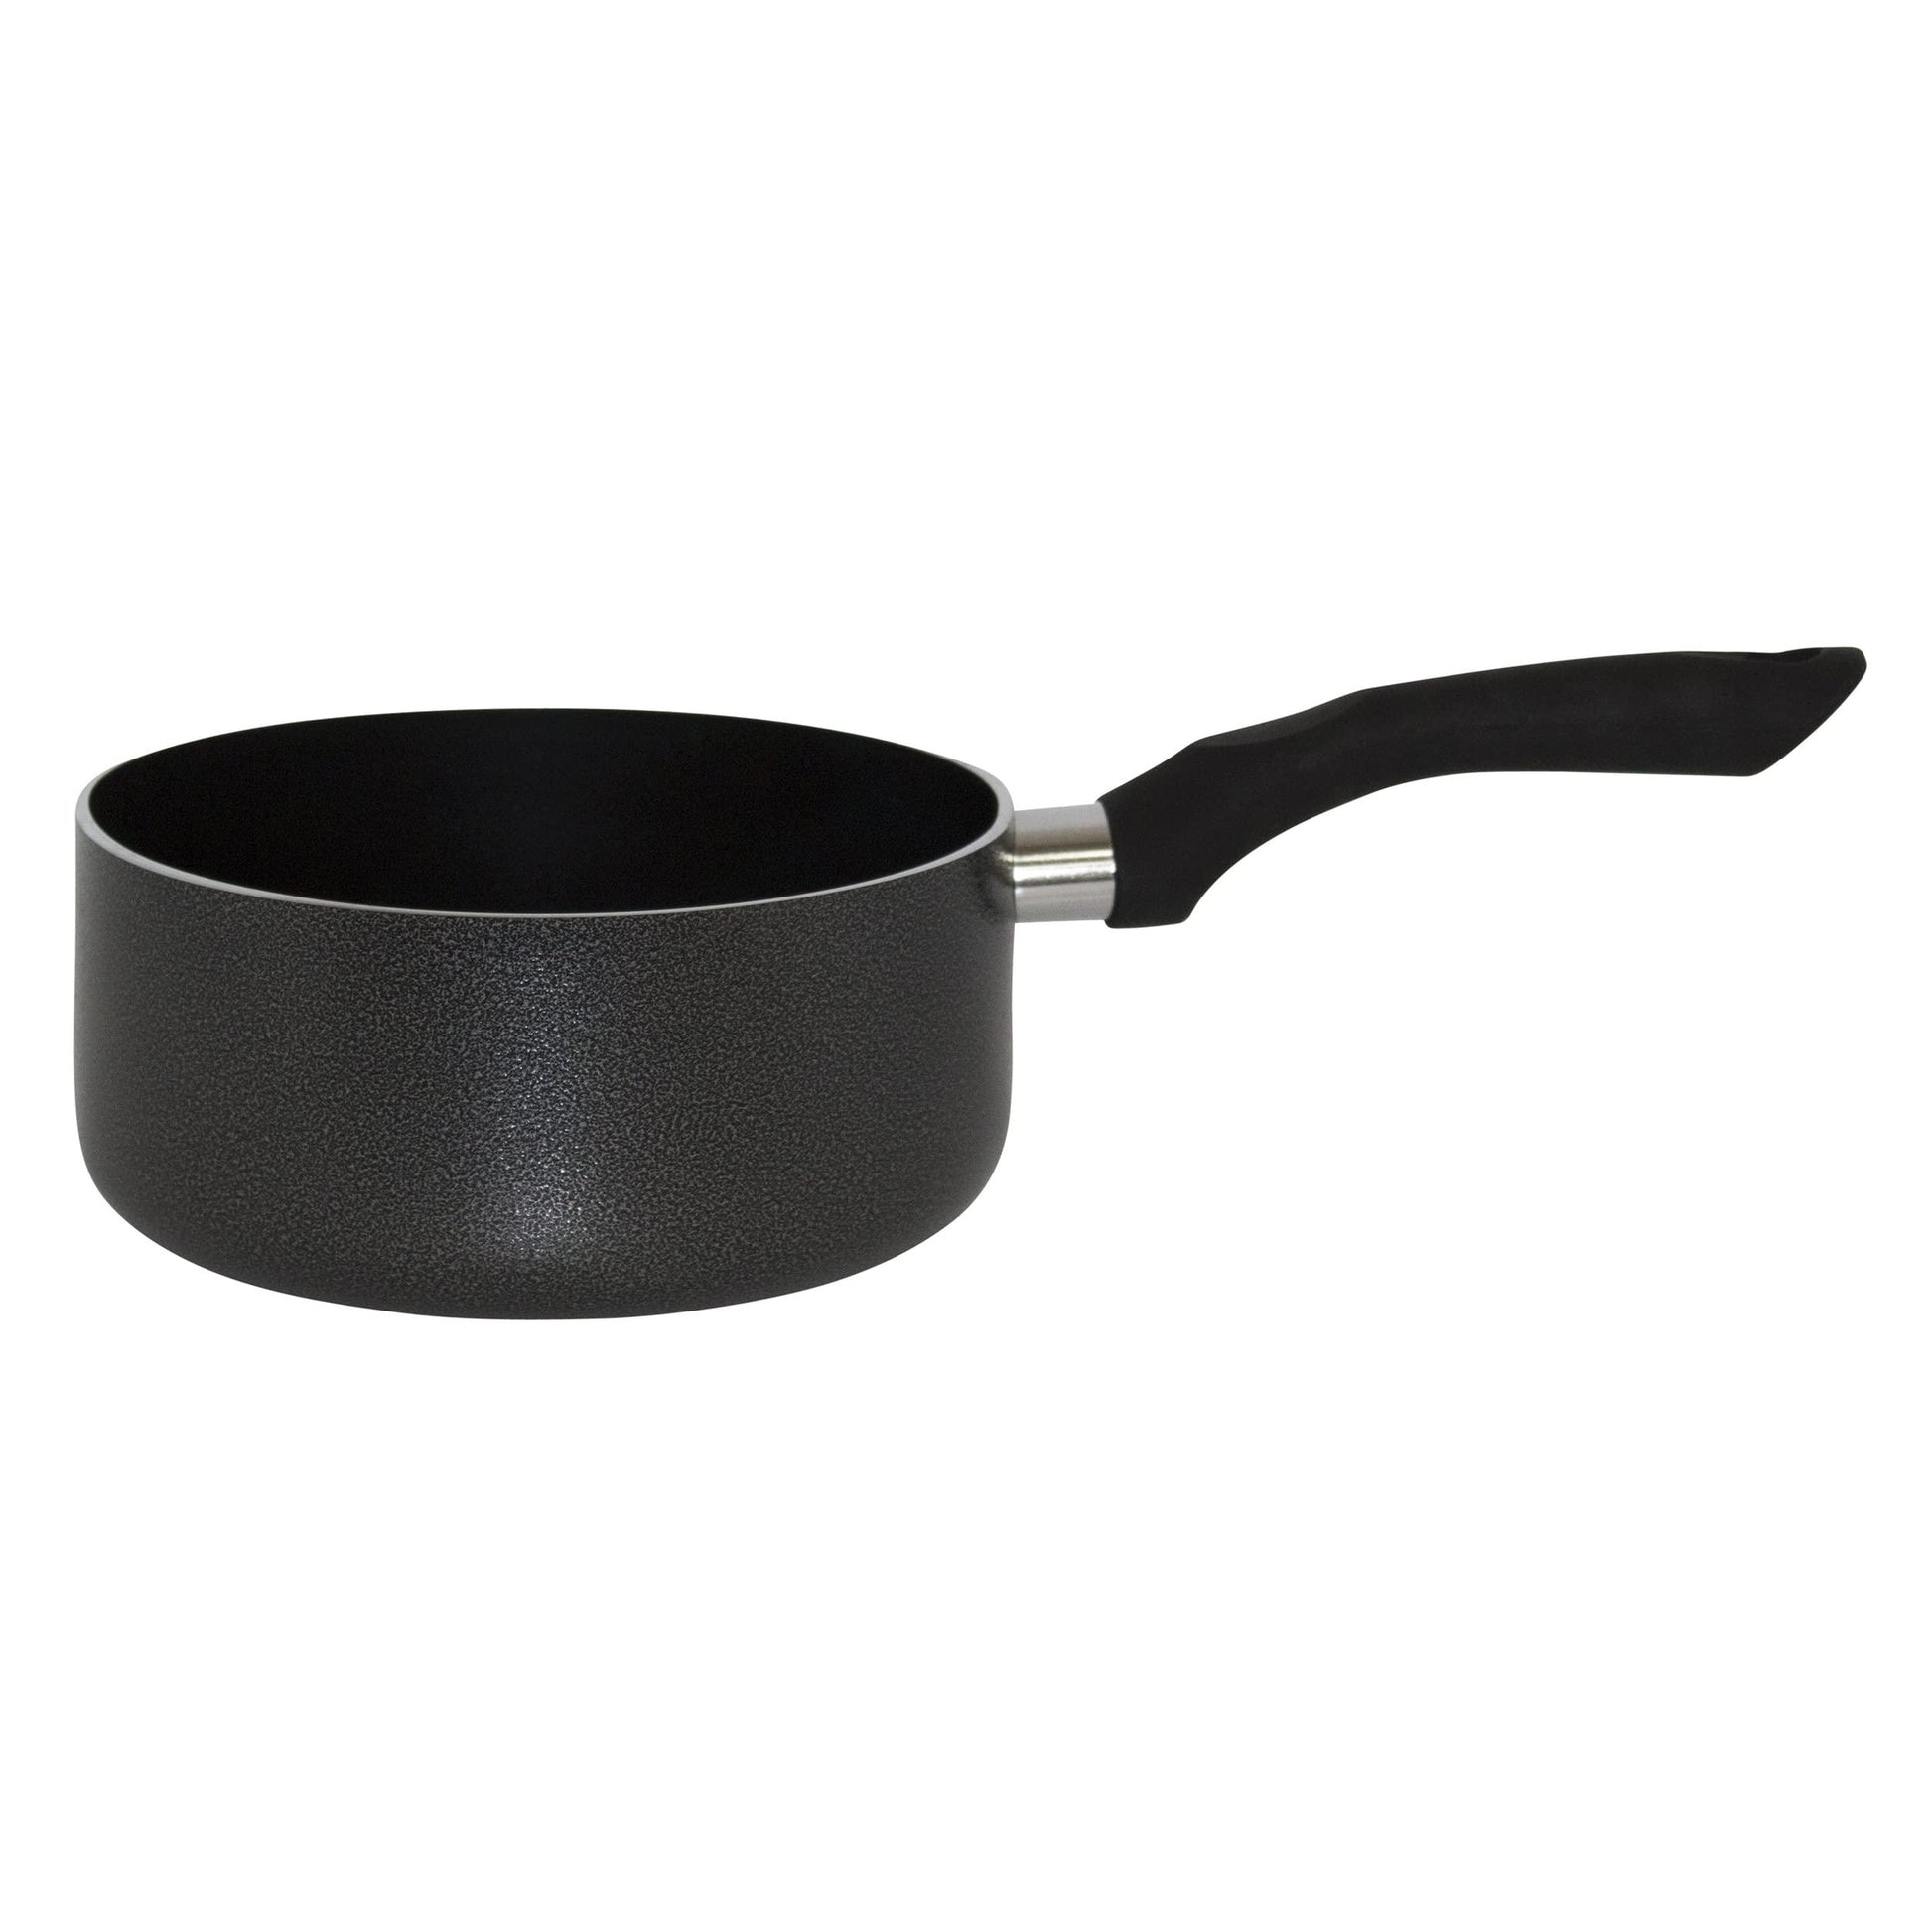 IMUSA USA 2 Quart Charcoal Exterior Sauce Pan with Nonstick Interior and Black Soft-Touch Handle - CookCave